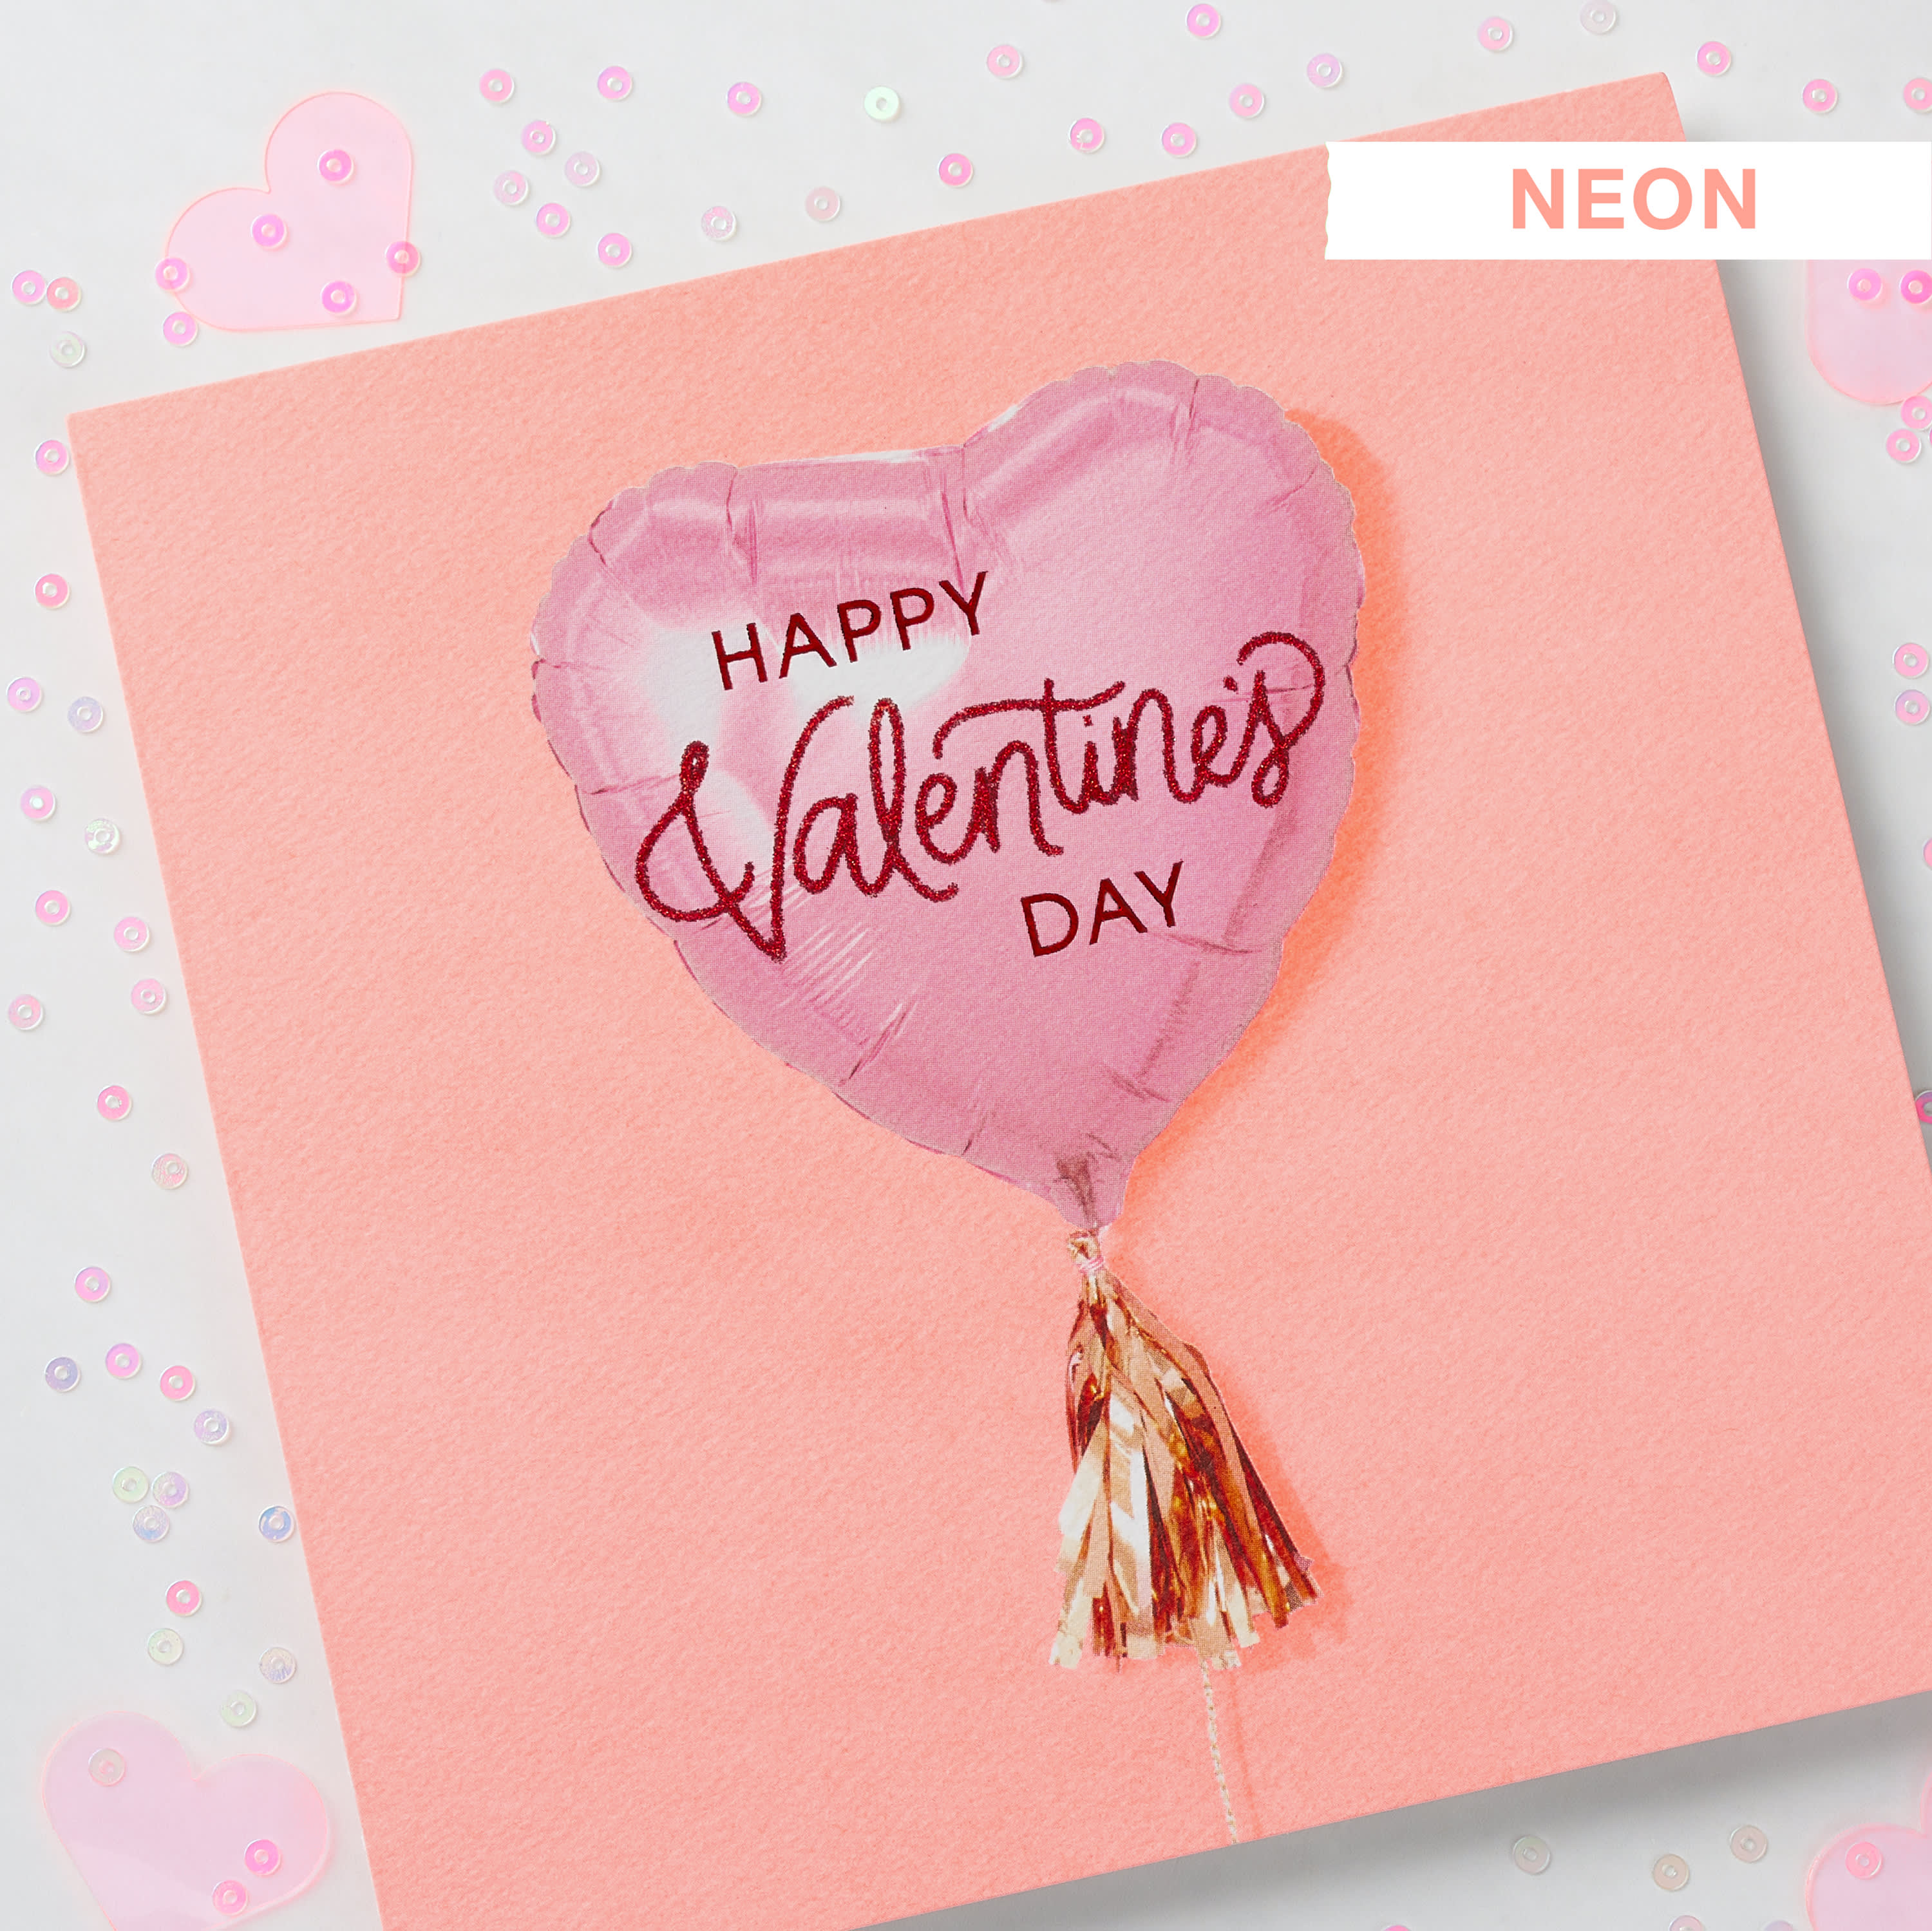 Balloon Valentine's Day Cards, 6-Count image